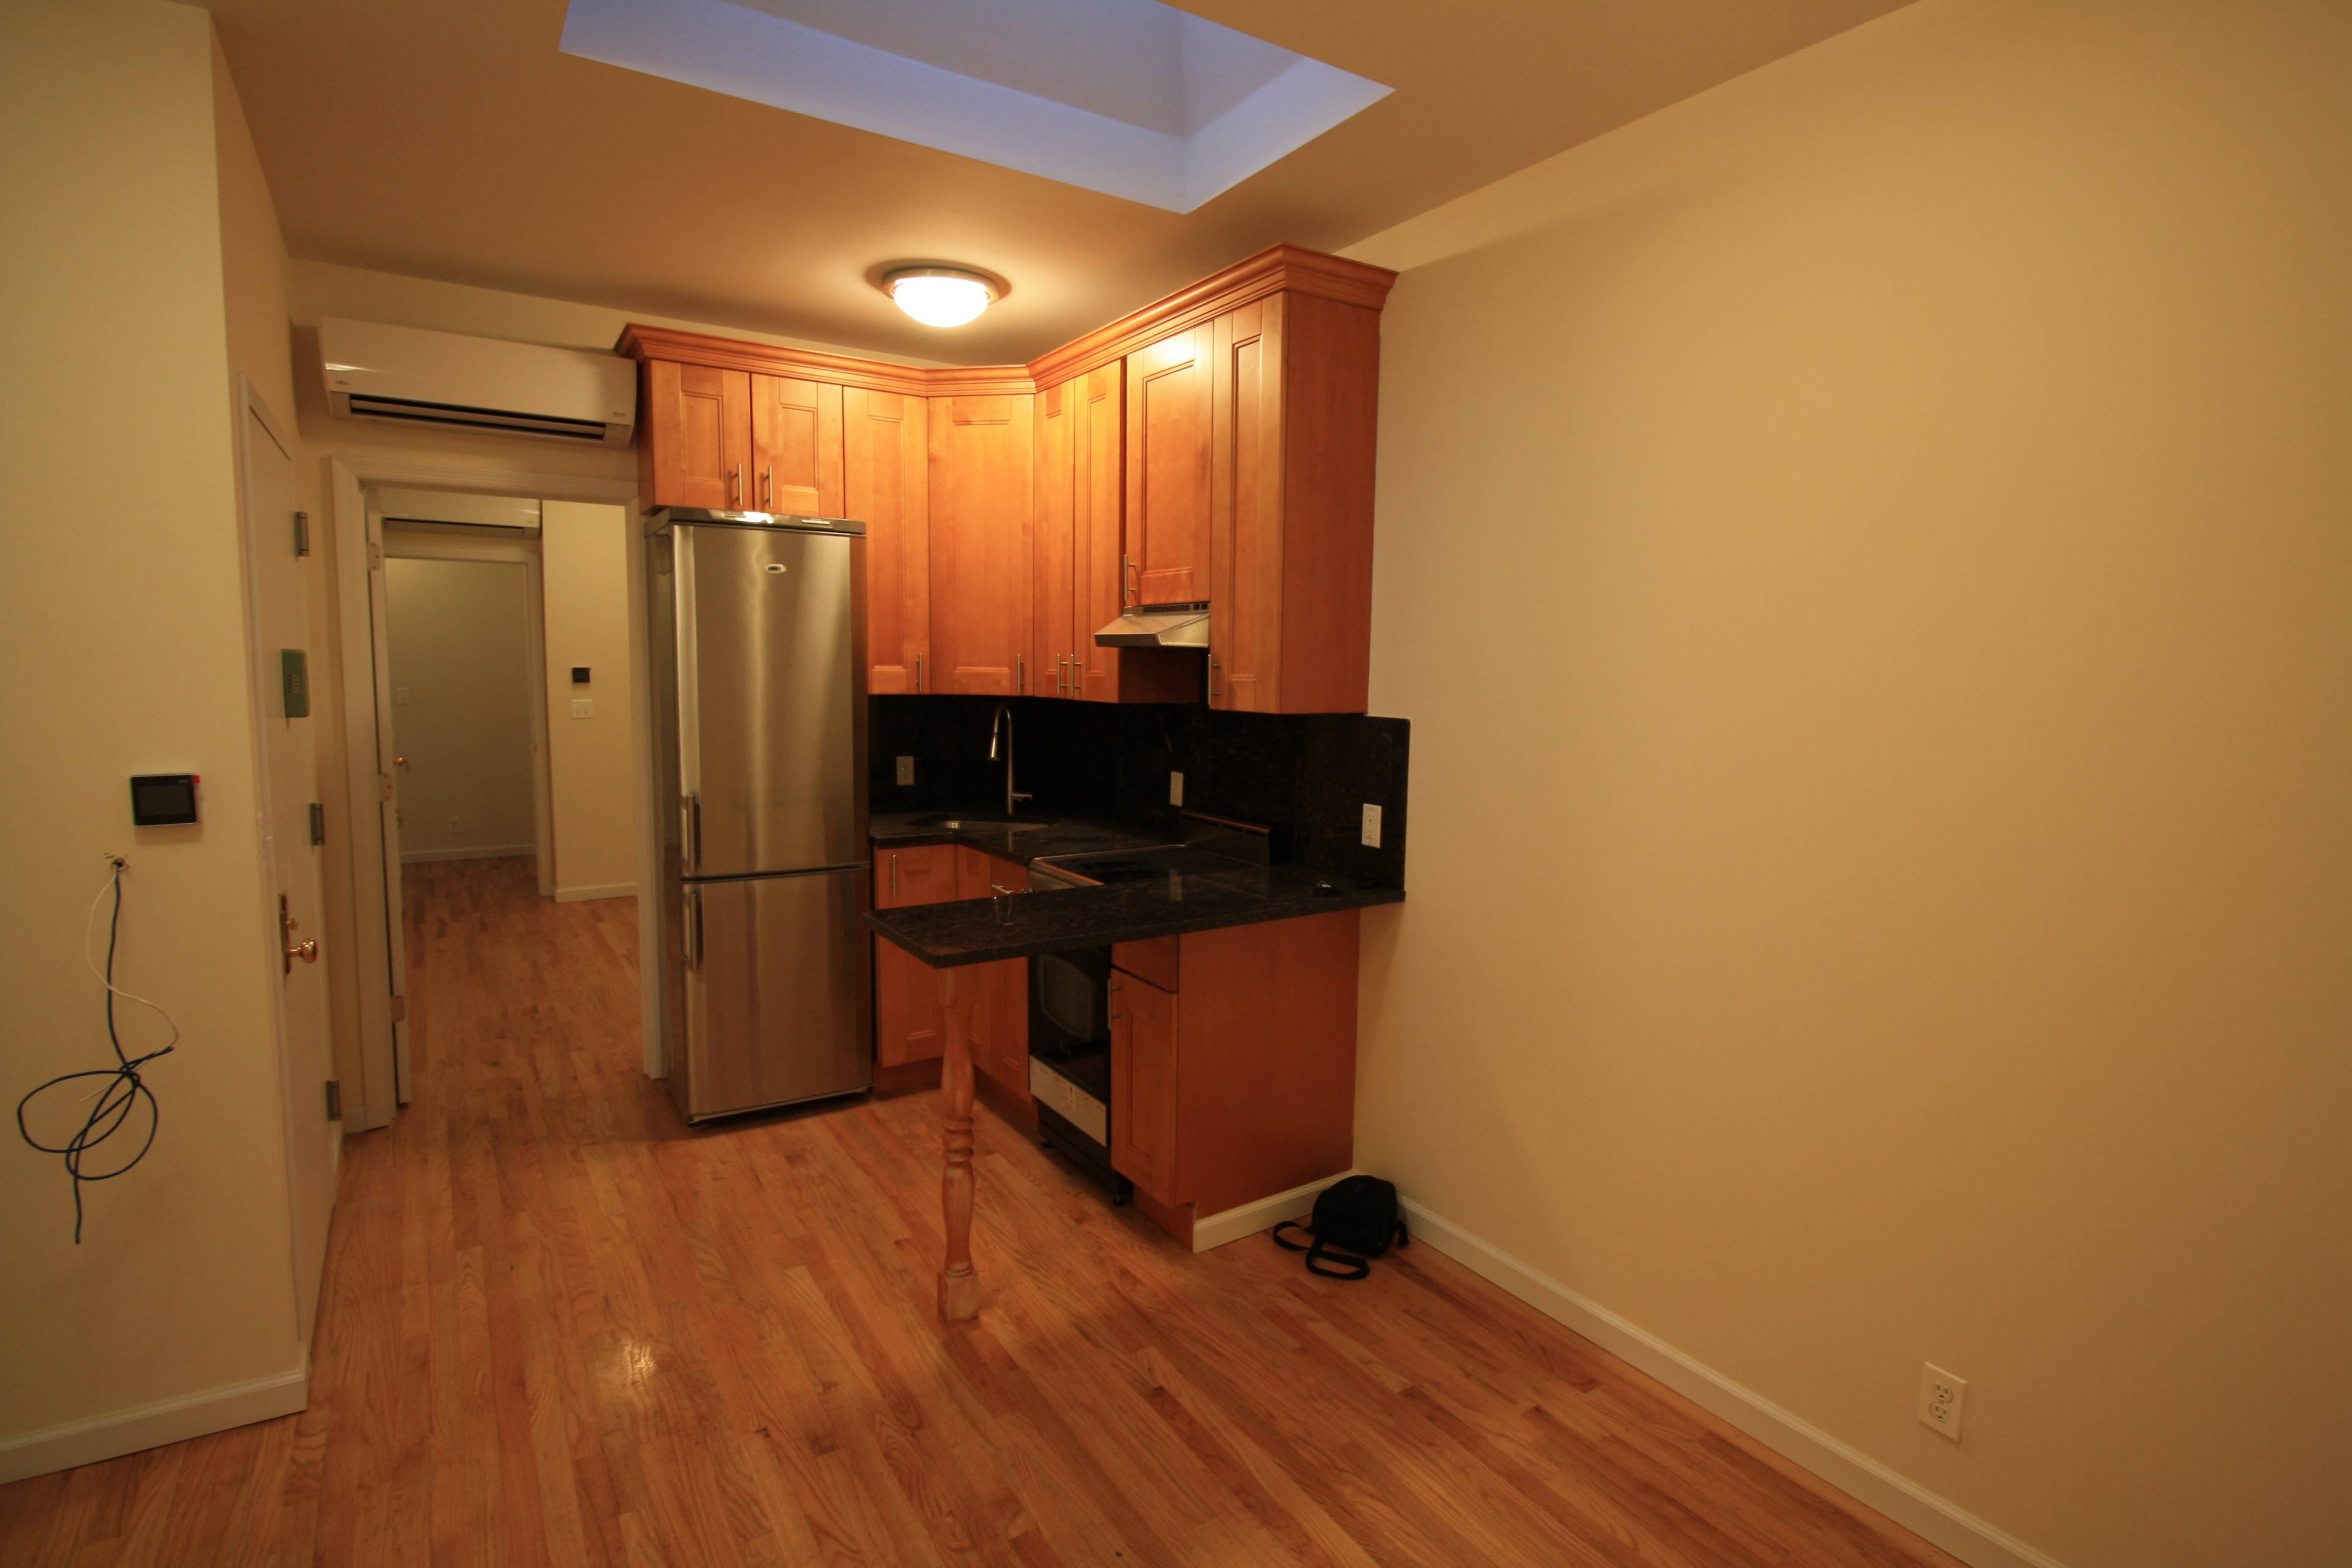 Stylish and Impressive, Brand New 2 Bedroom., 2 Bathroom, Within Short Distance to Graham Ave L Train